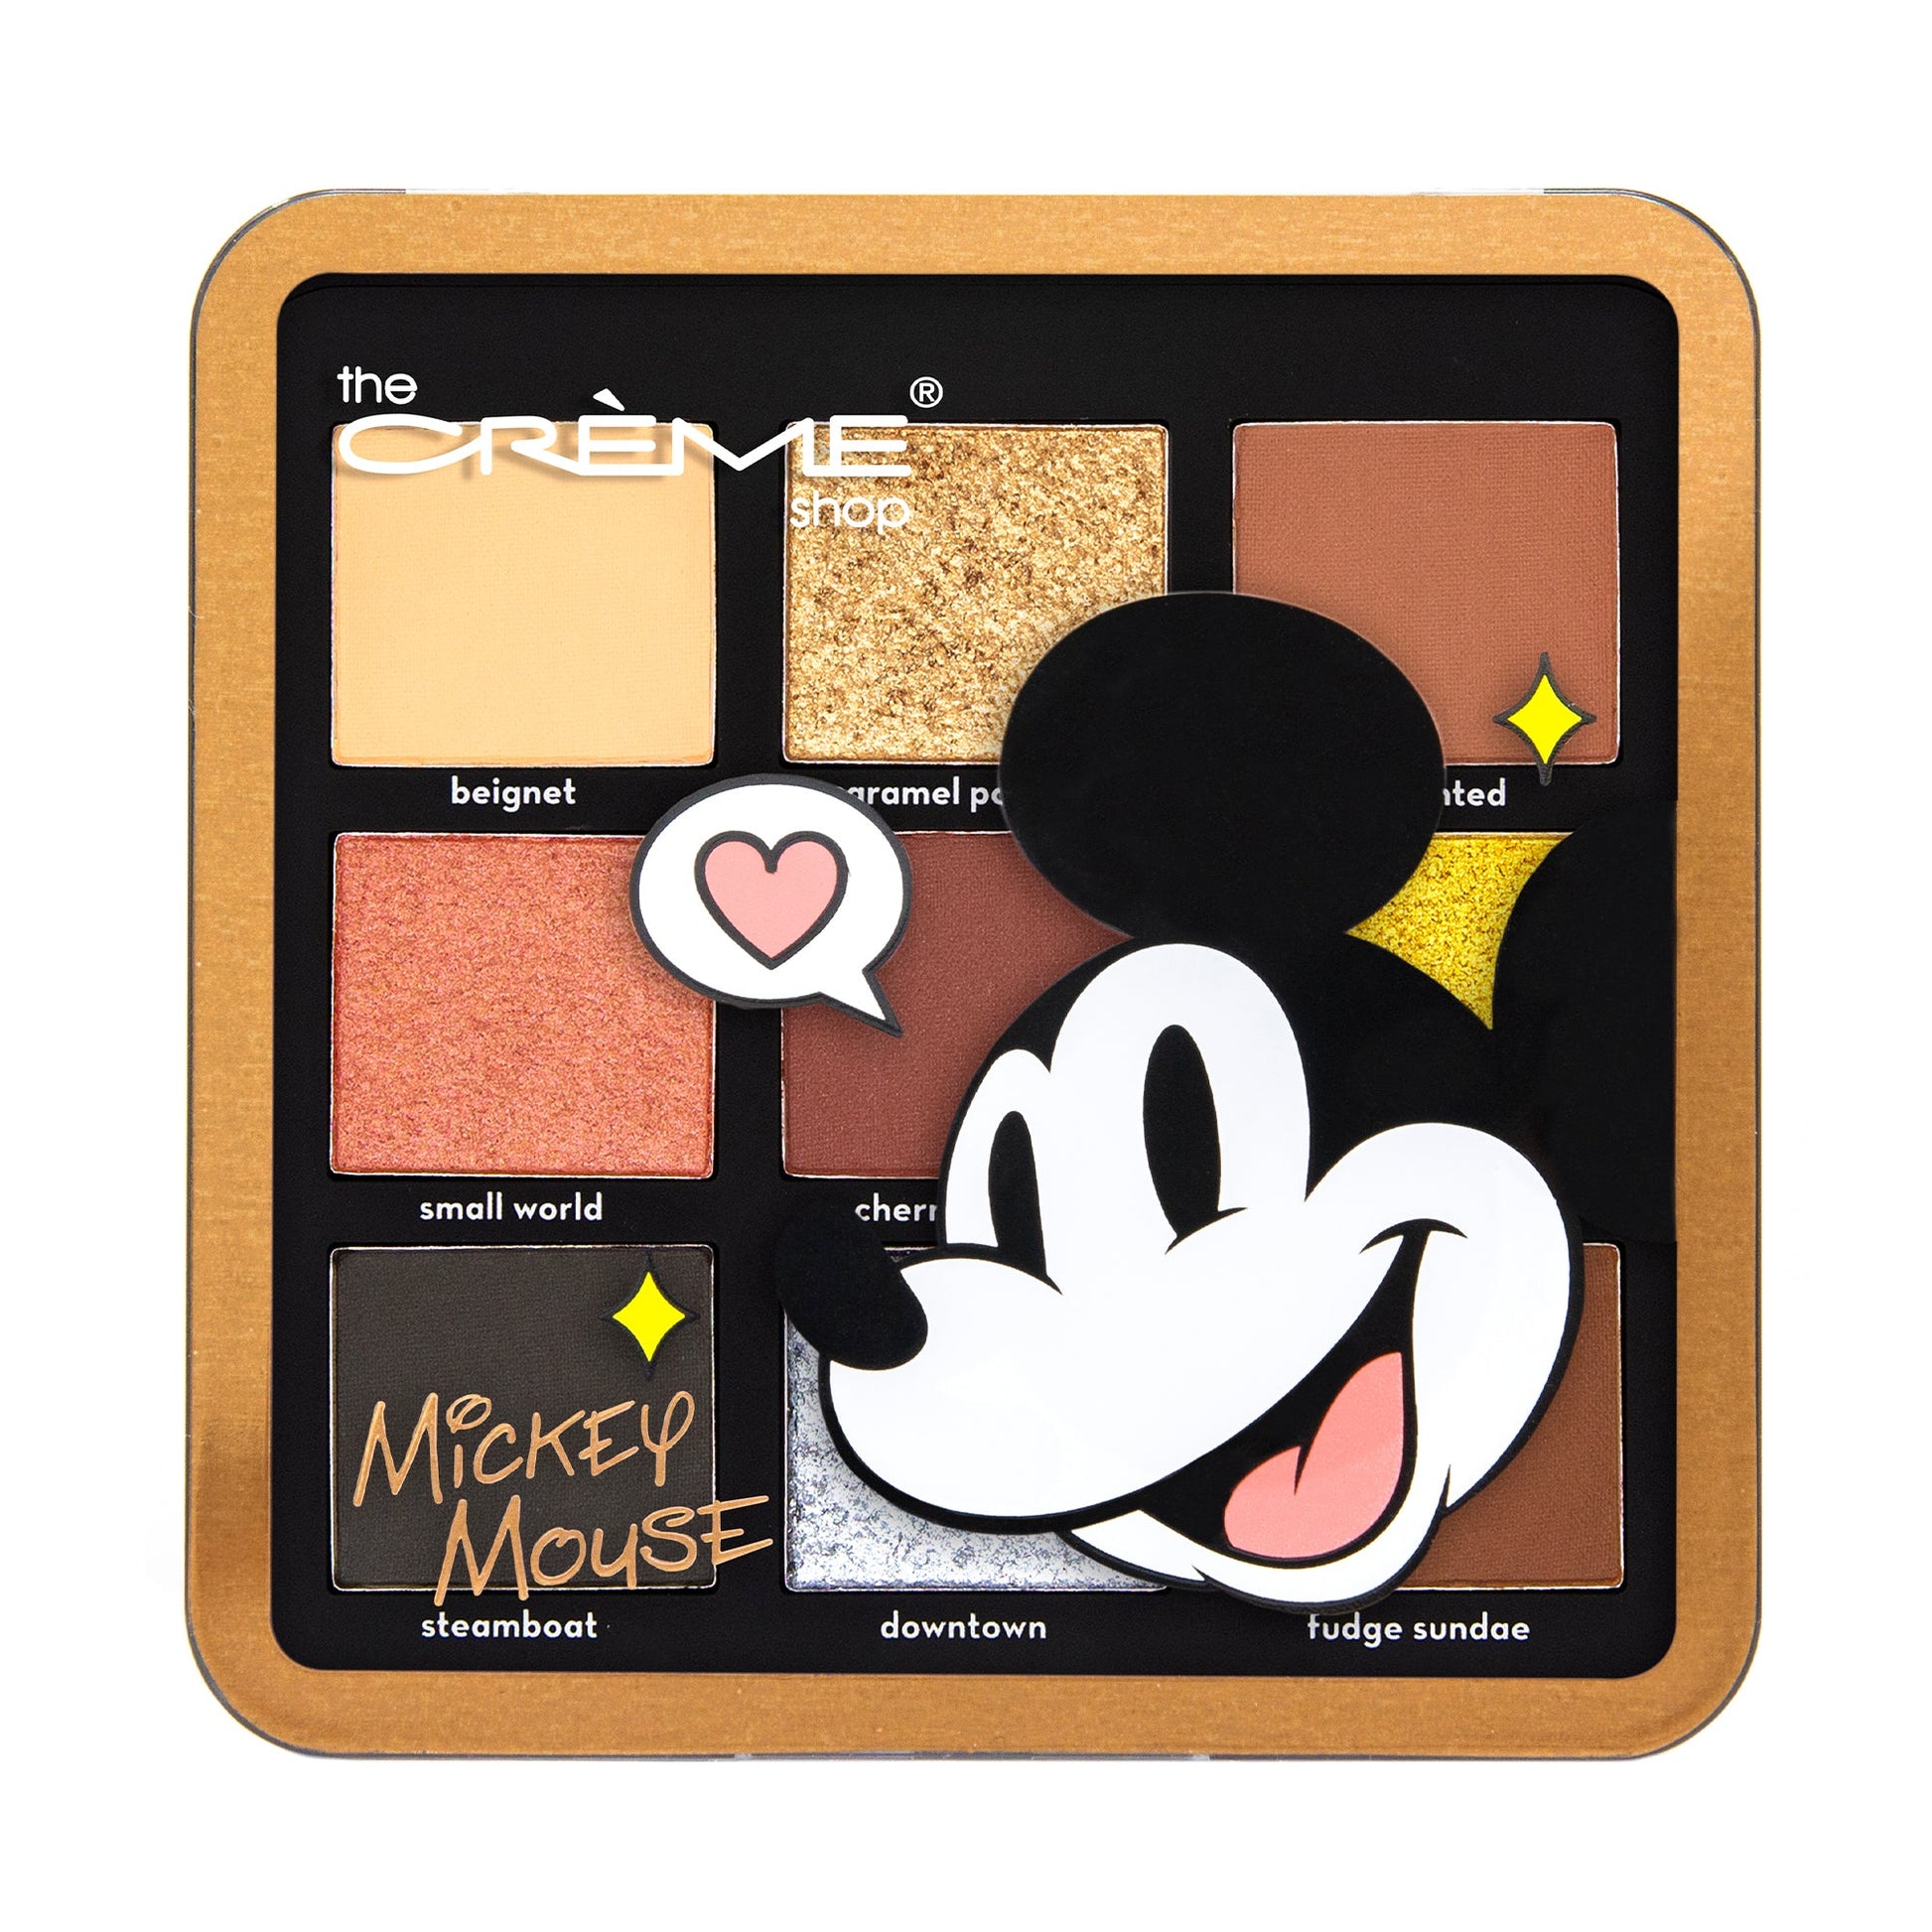 Disney The Creme Shop Minnie and Mickey Makeup Toiletry Bag New